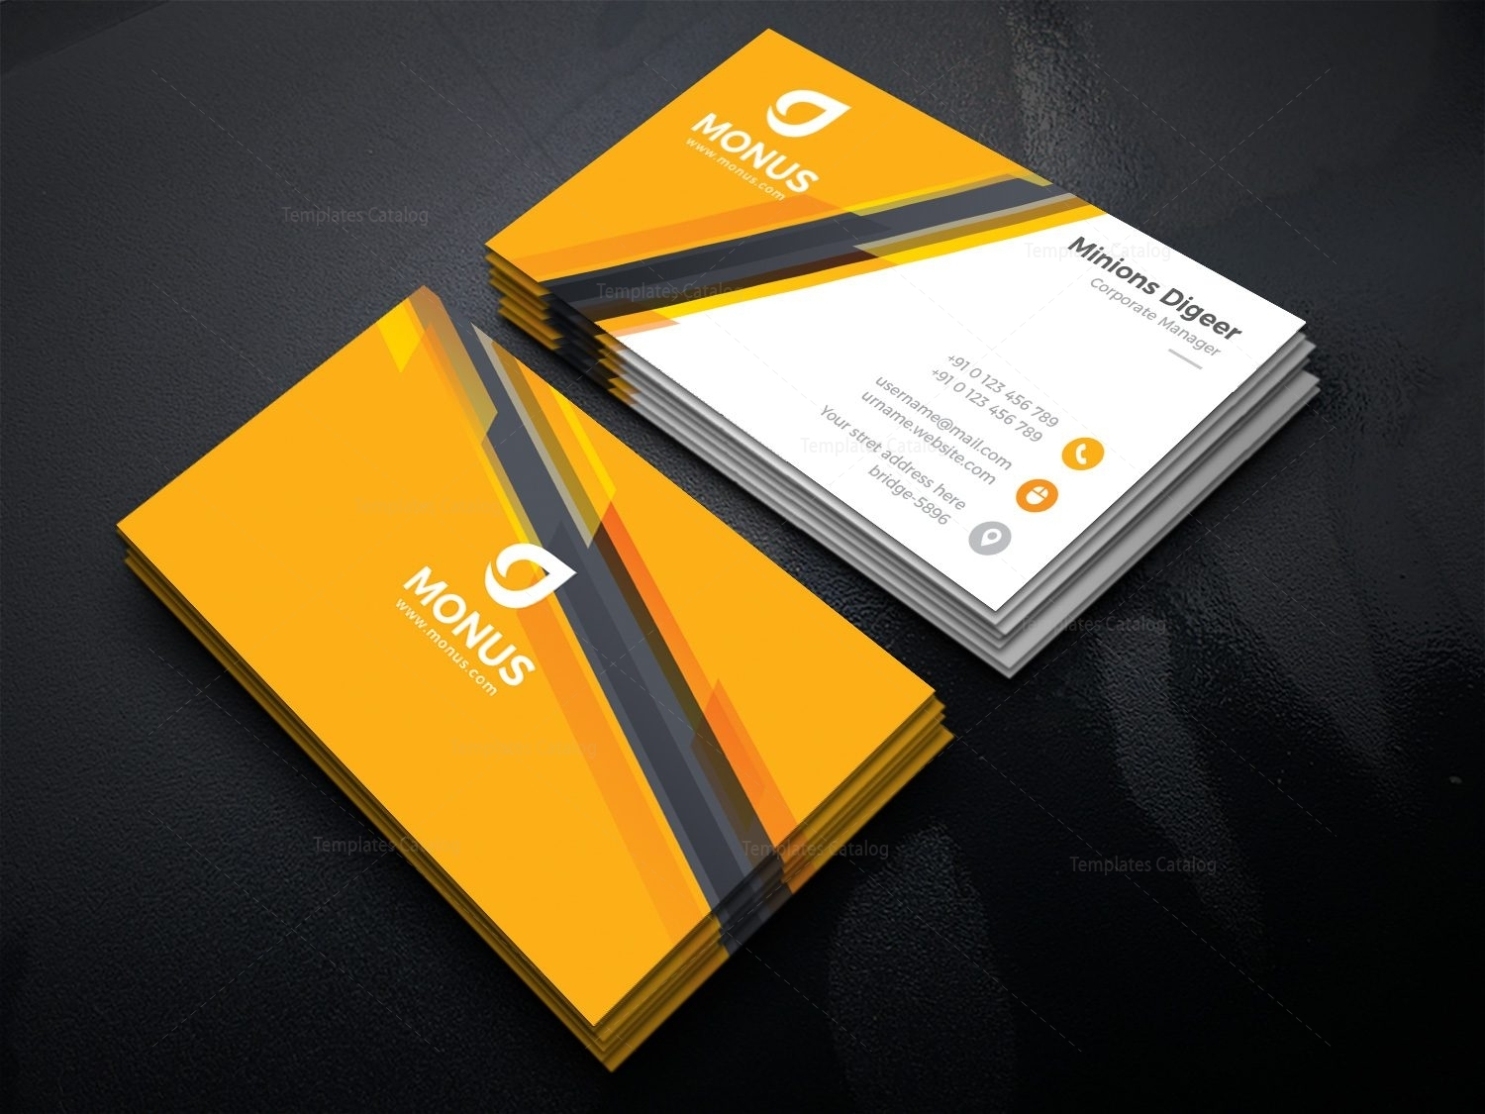 Awesome Corporate Business Card Design Template 001585 - Template Catalog for Company Business Cards Templates